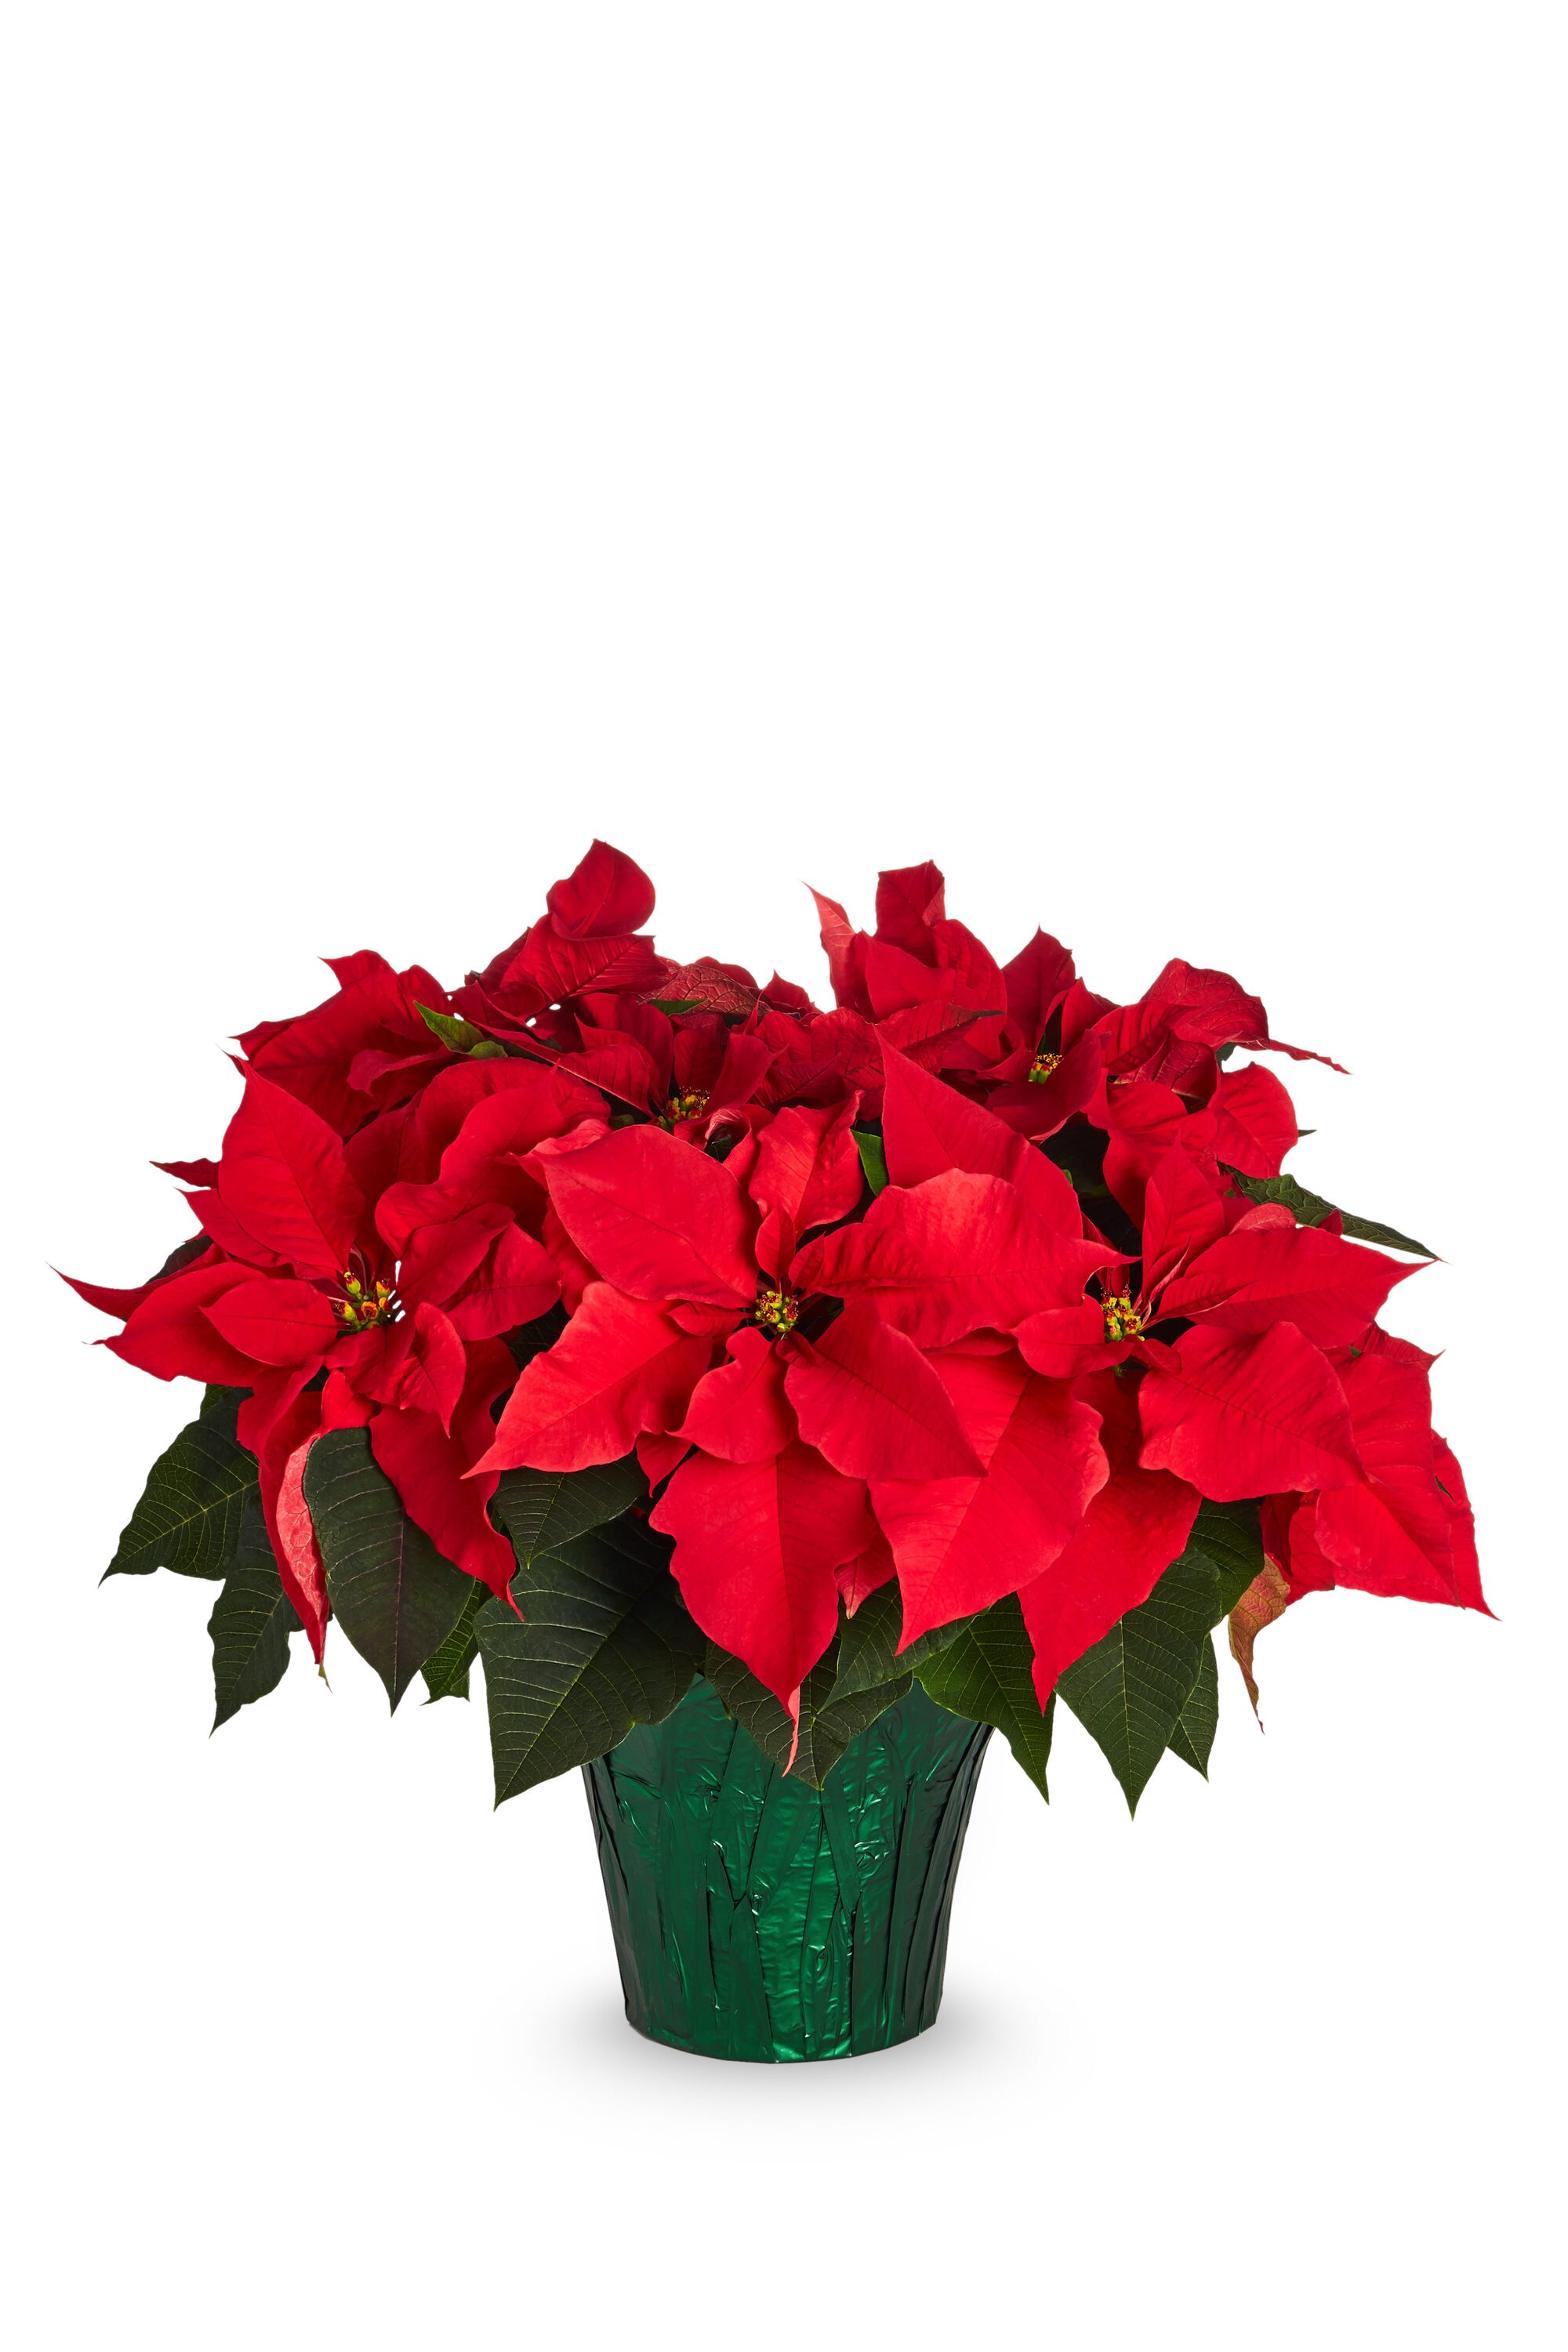 2 Potted Plants of red Poinsettia in 15cm pots for Christmas Decoration Includes Postage 